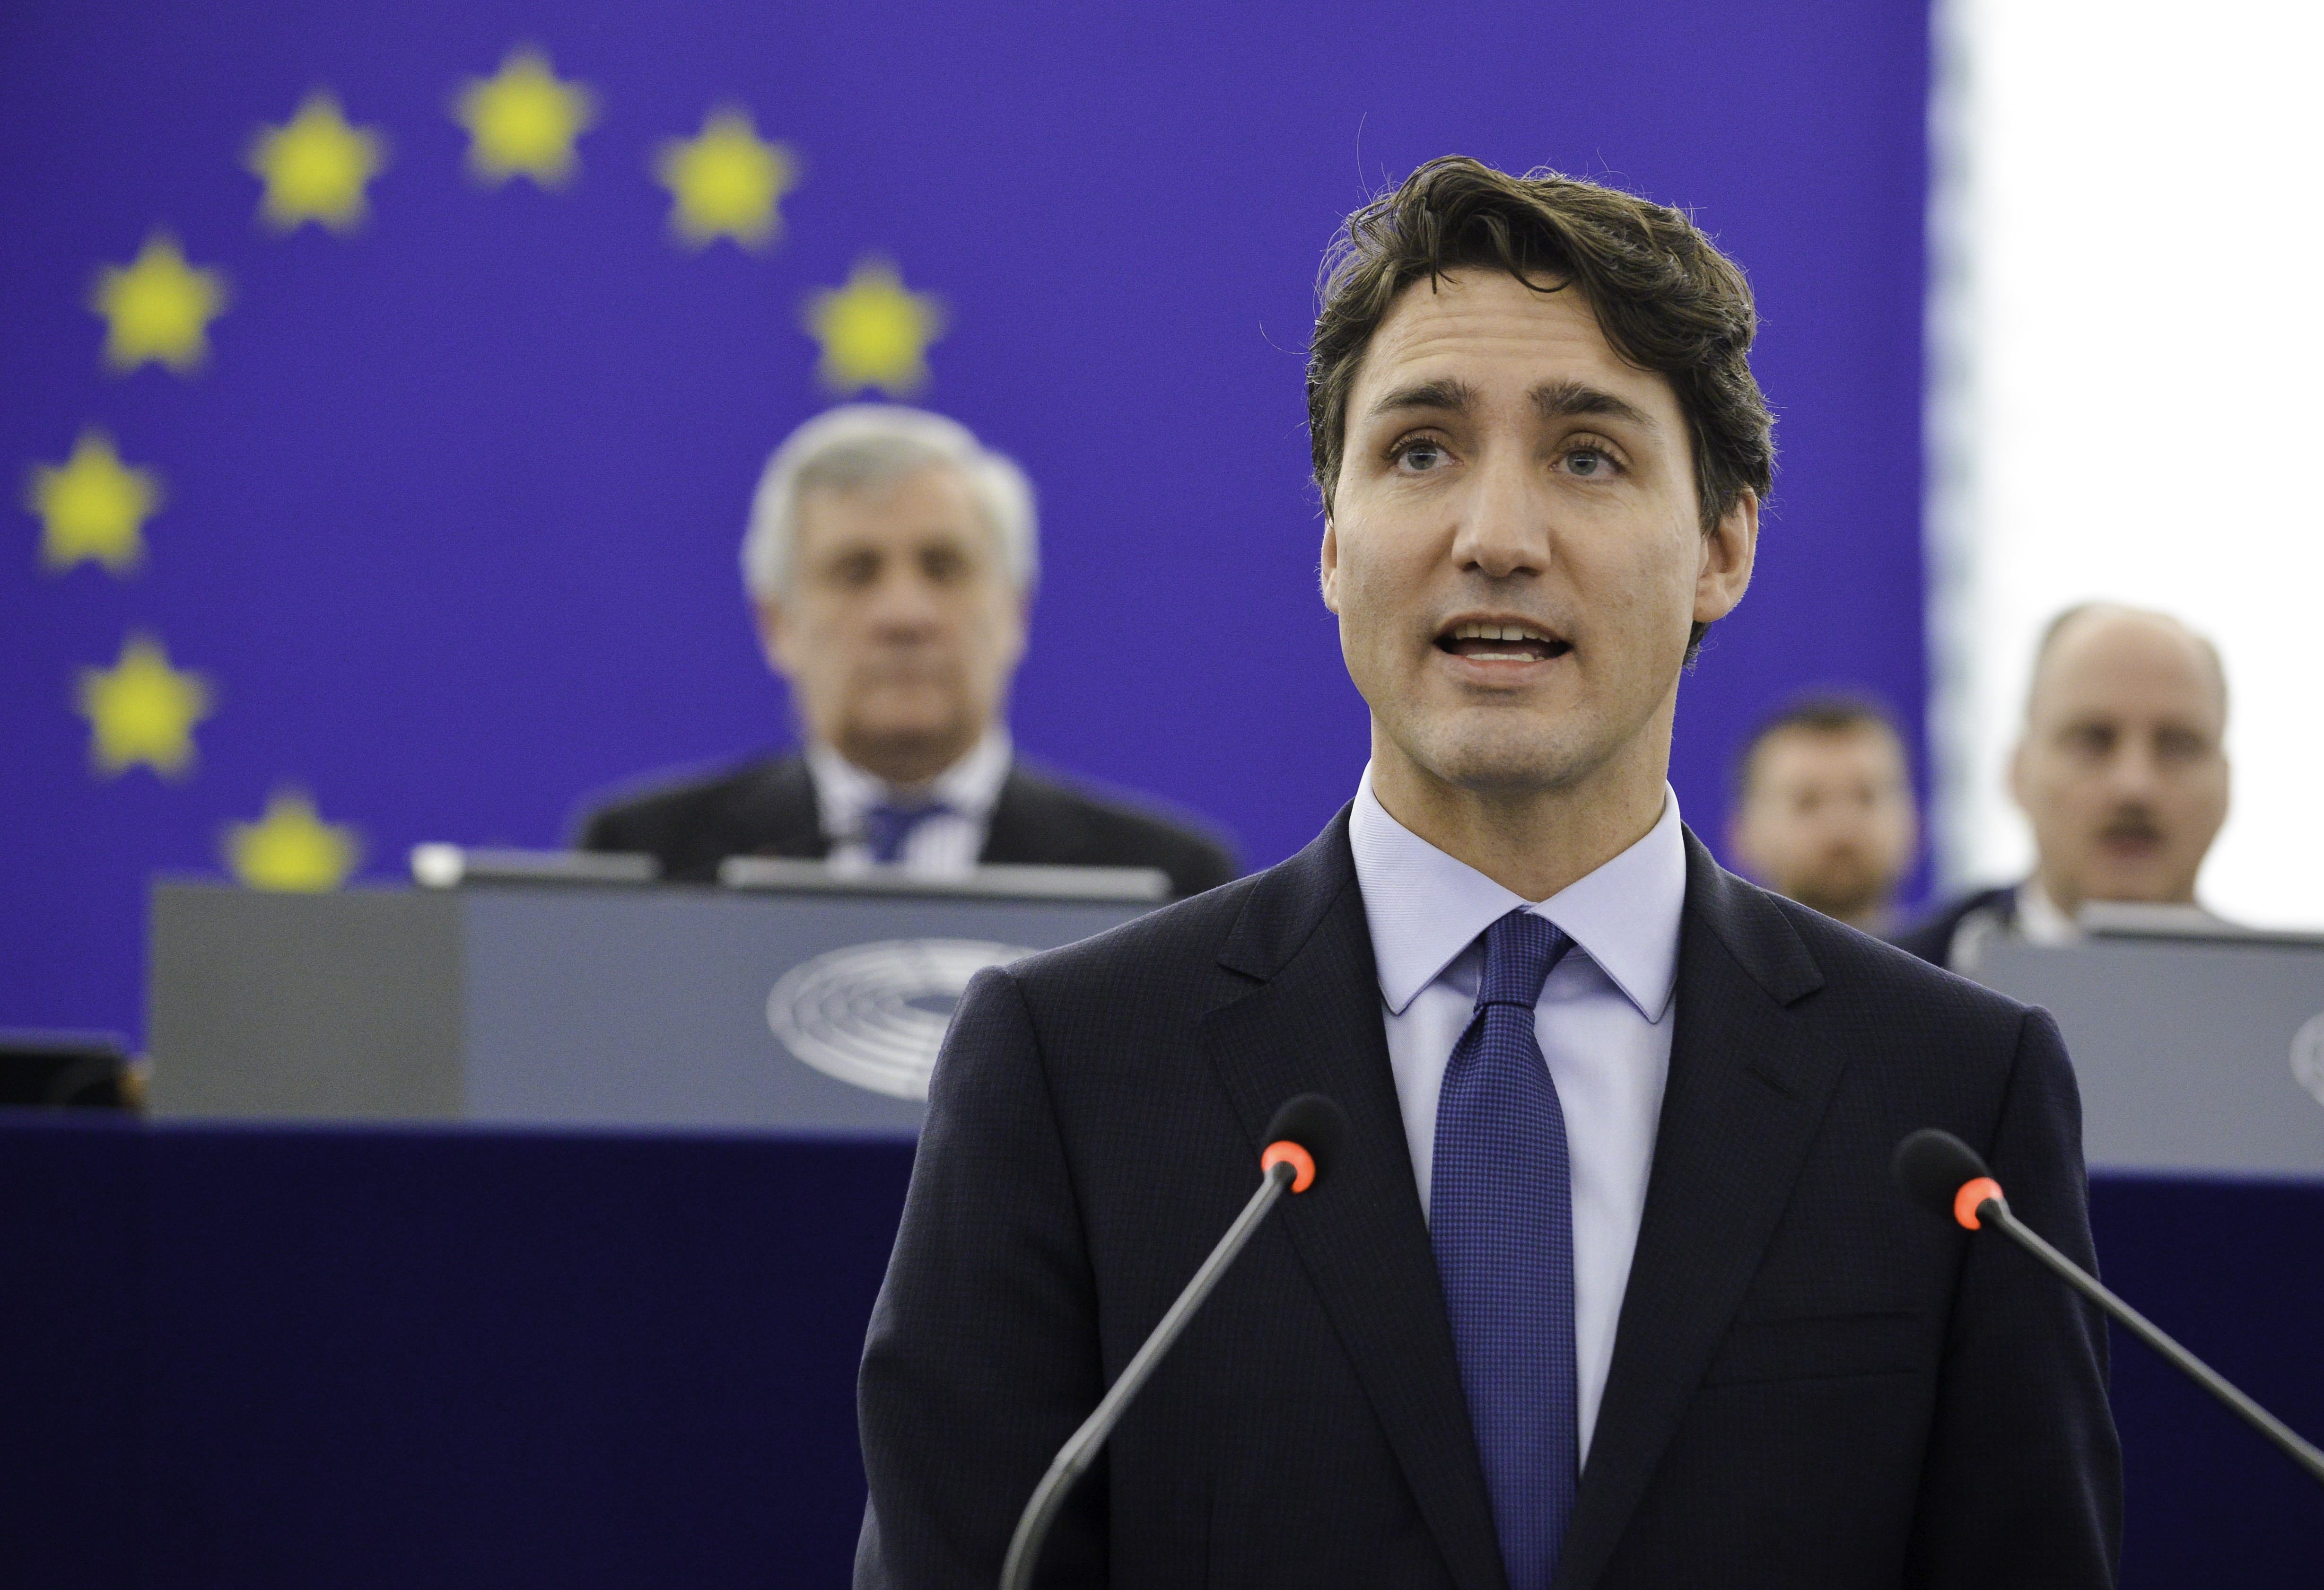 Canadian Prime Minister Justin Trudeau speaking at the European Parliament in Strasbourg (by the European Parliament)